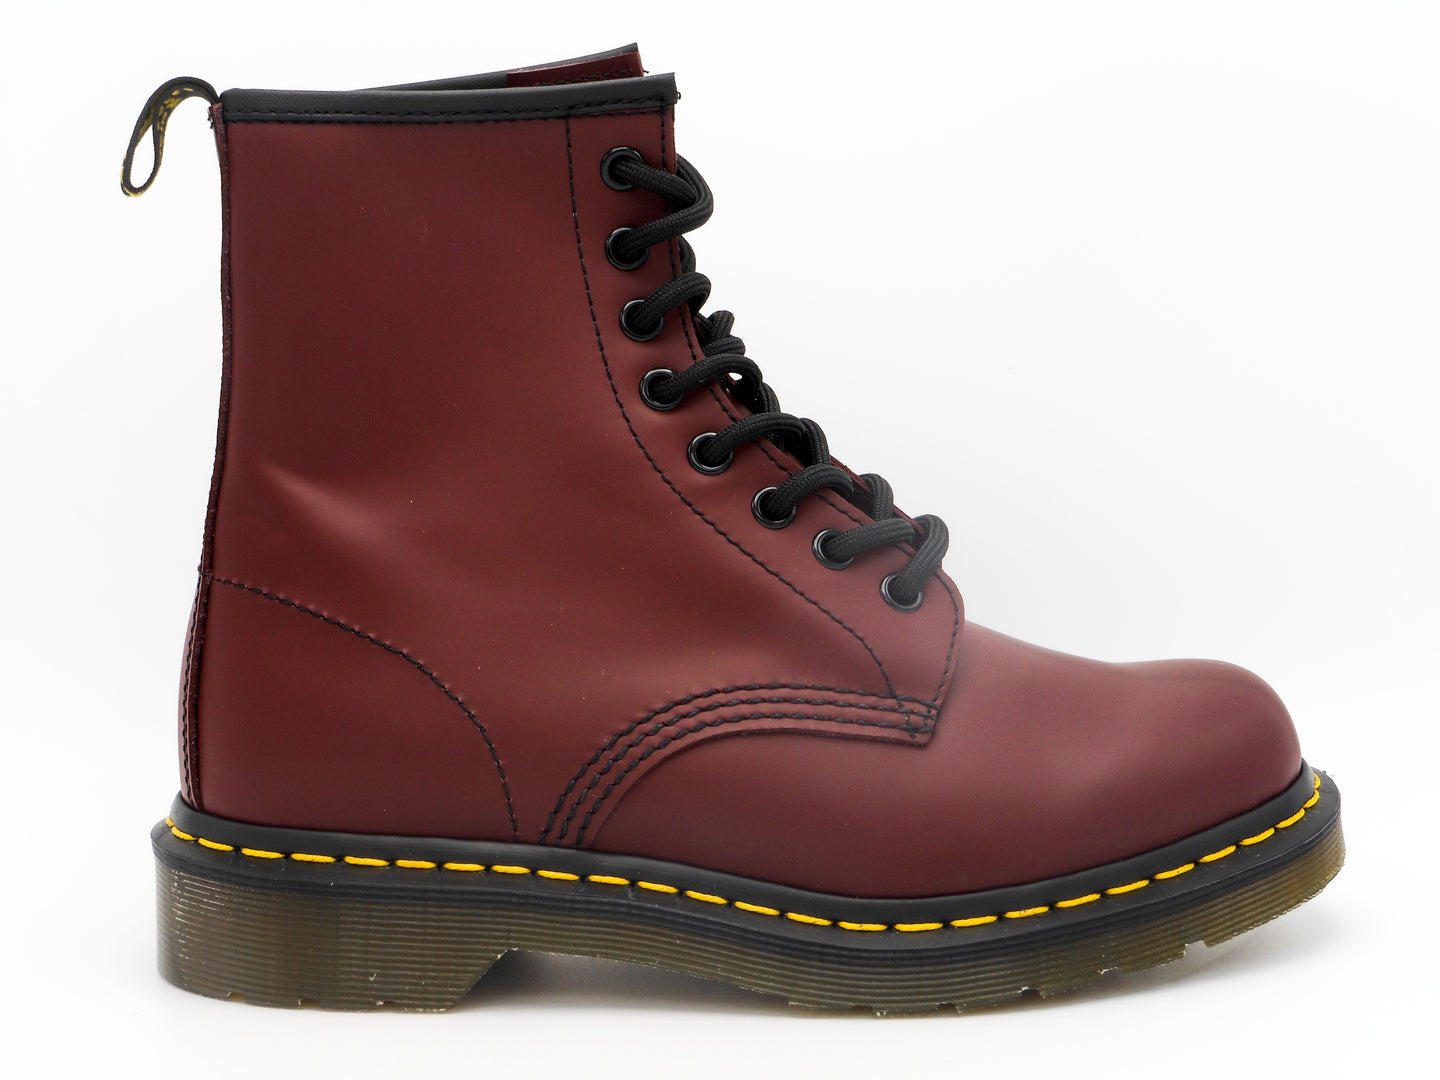 DR. MARTENS 1460 cherry red smooth